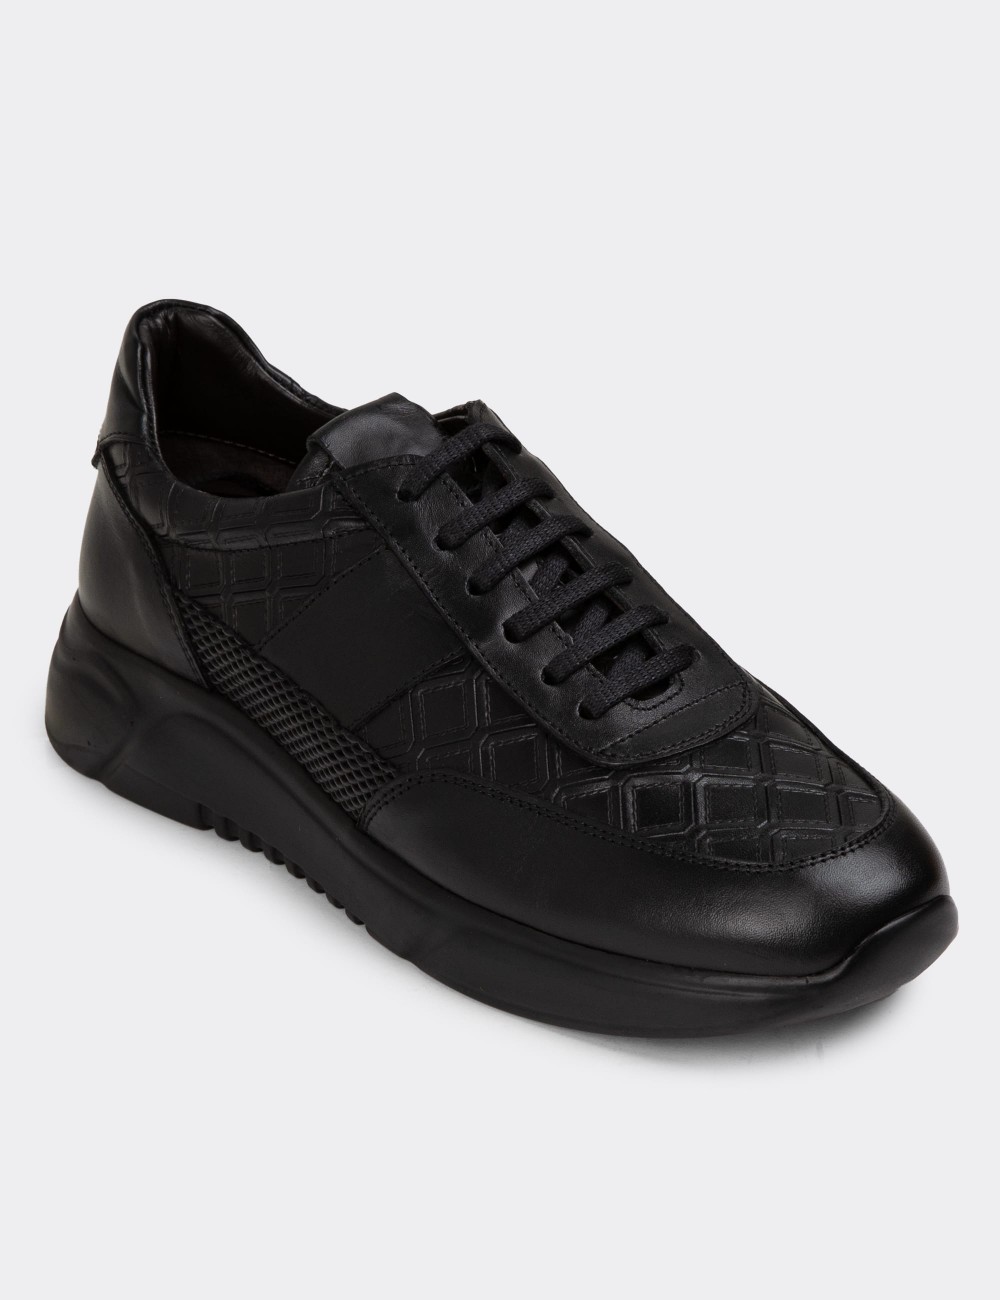 Black Leather Sneakers - 01963MSYHE03